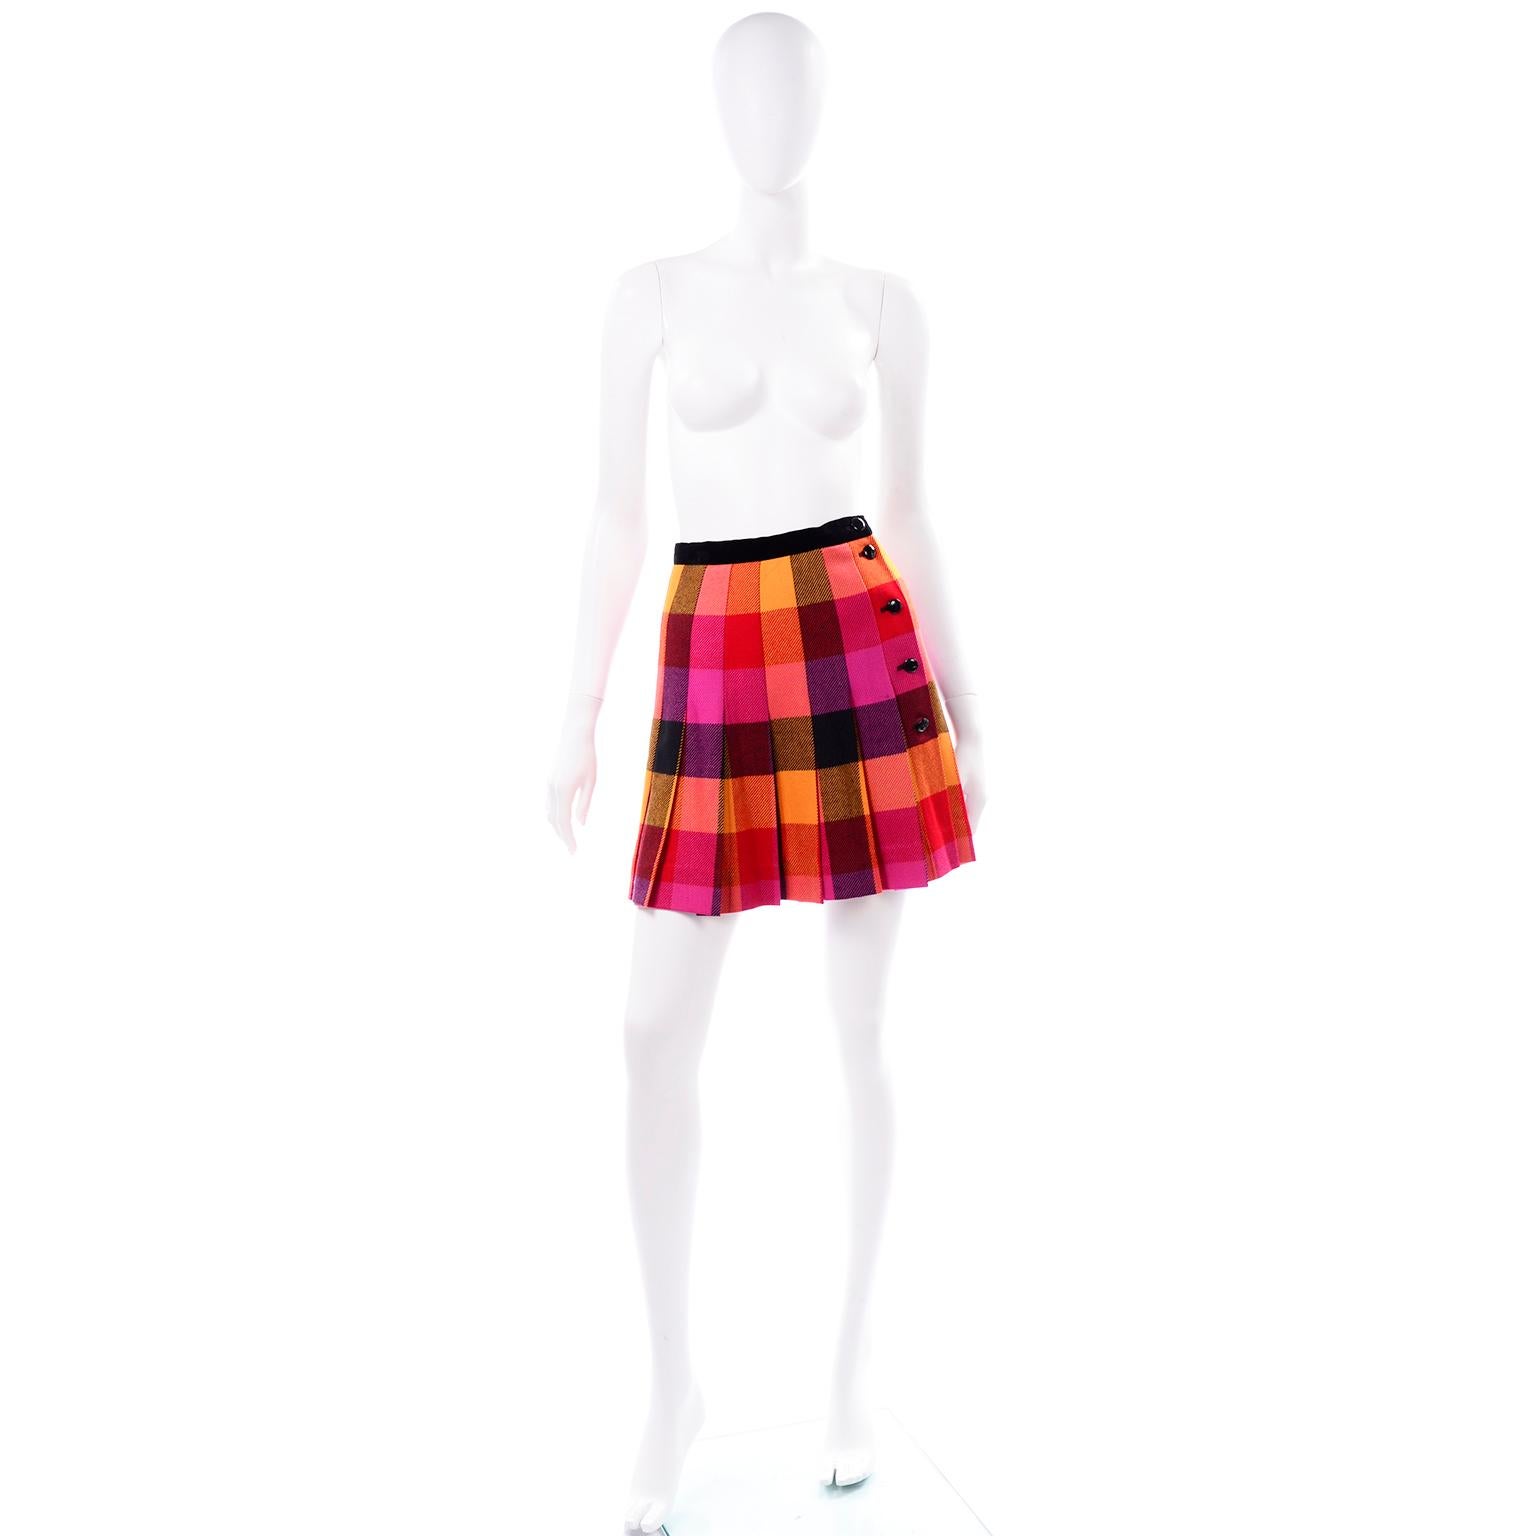 We love vintage Escada pieces that were designed by Margaretha Ley, and this colorful wool pleated skirt is a great example of her eye for color. The fabric has the most beautiful pink, red, purple, and orange/yellow tones in the plaid pattern. The